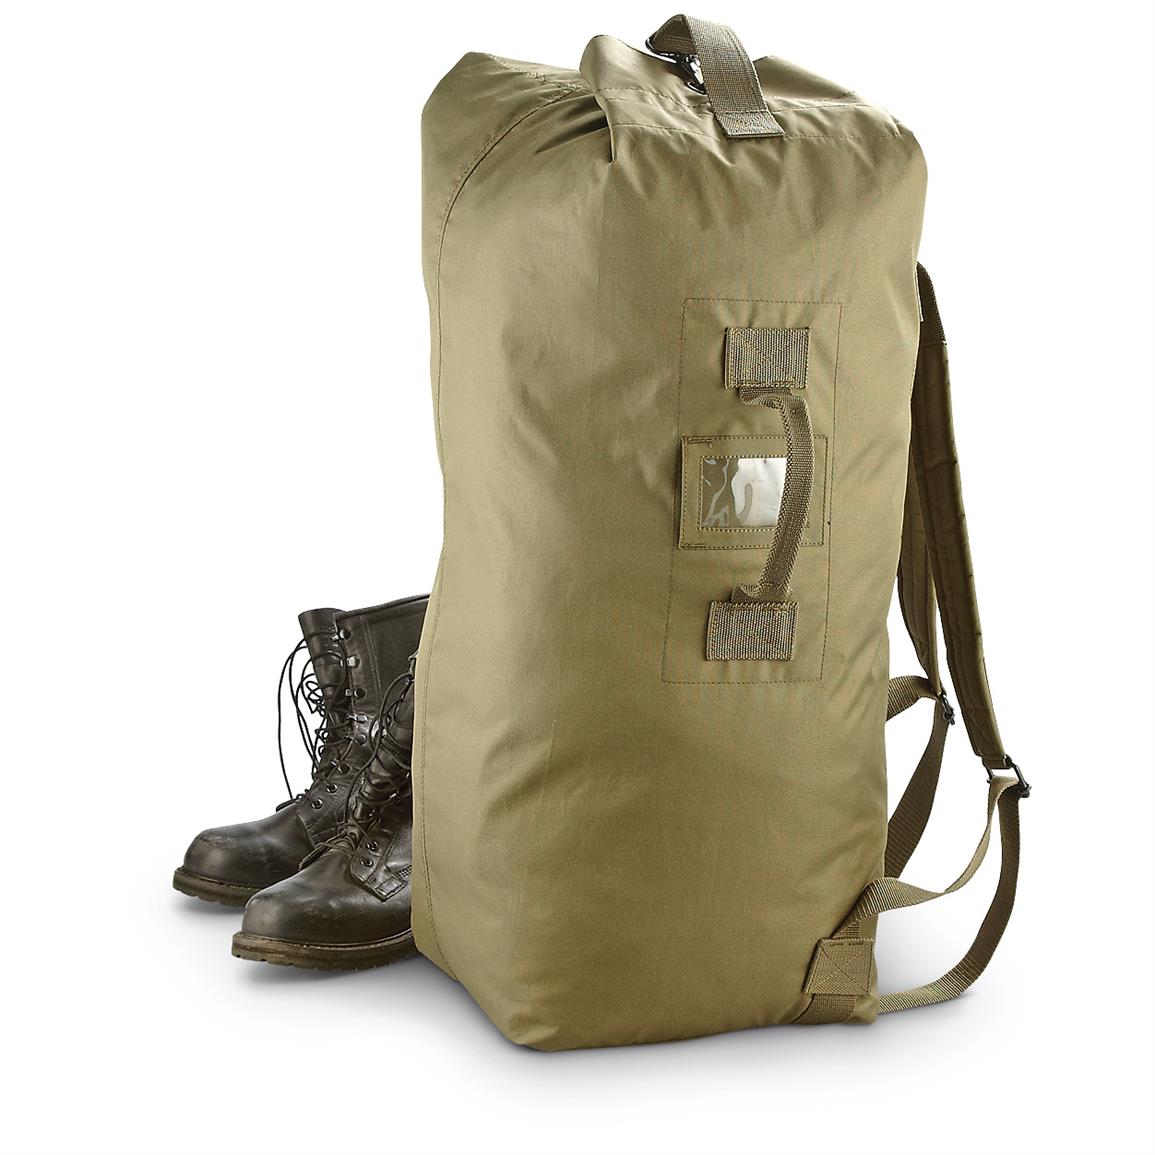 U.S. Military-style Duffel Bag, Olive Drab - 608448, Military Style Backpacks & Bags at ...